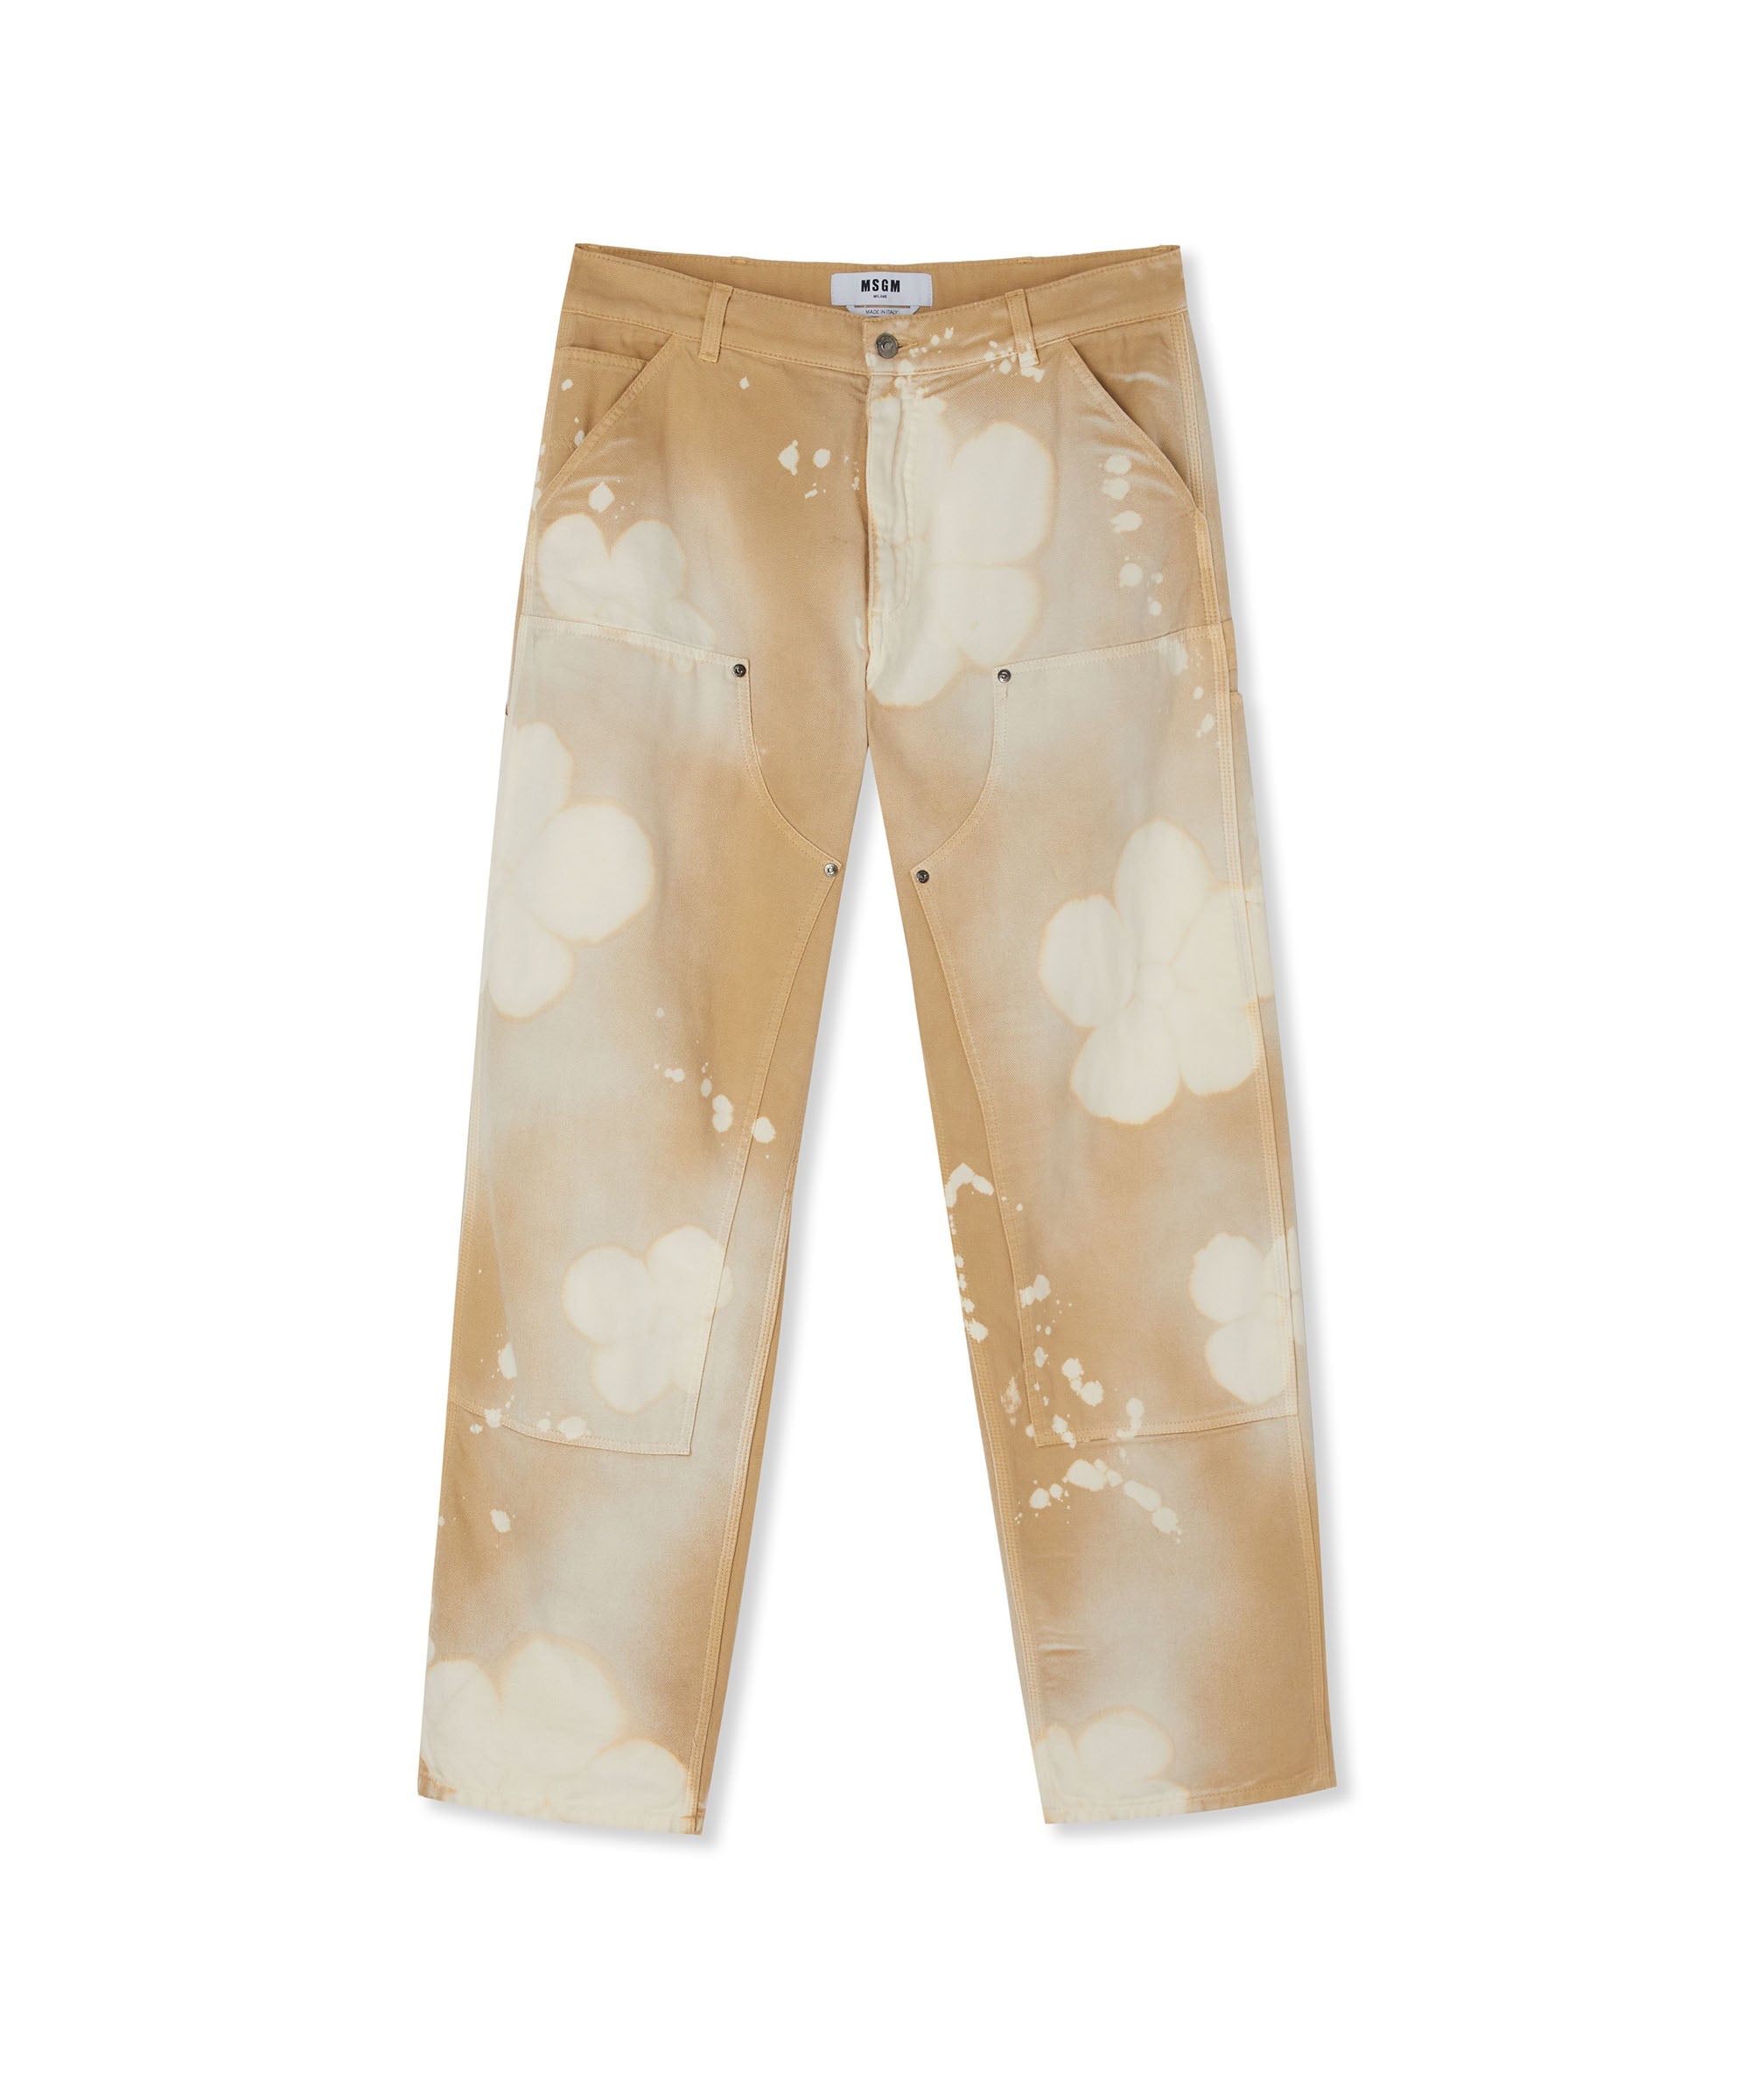 Workwear pants with tie-dye daisies - 1